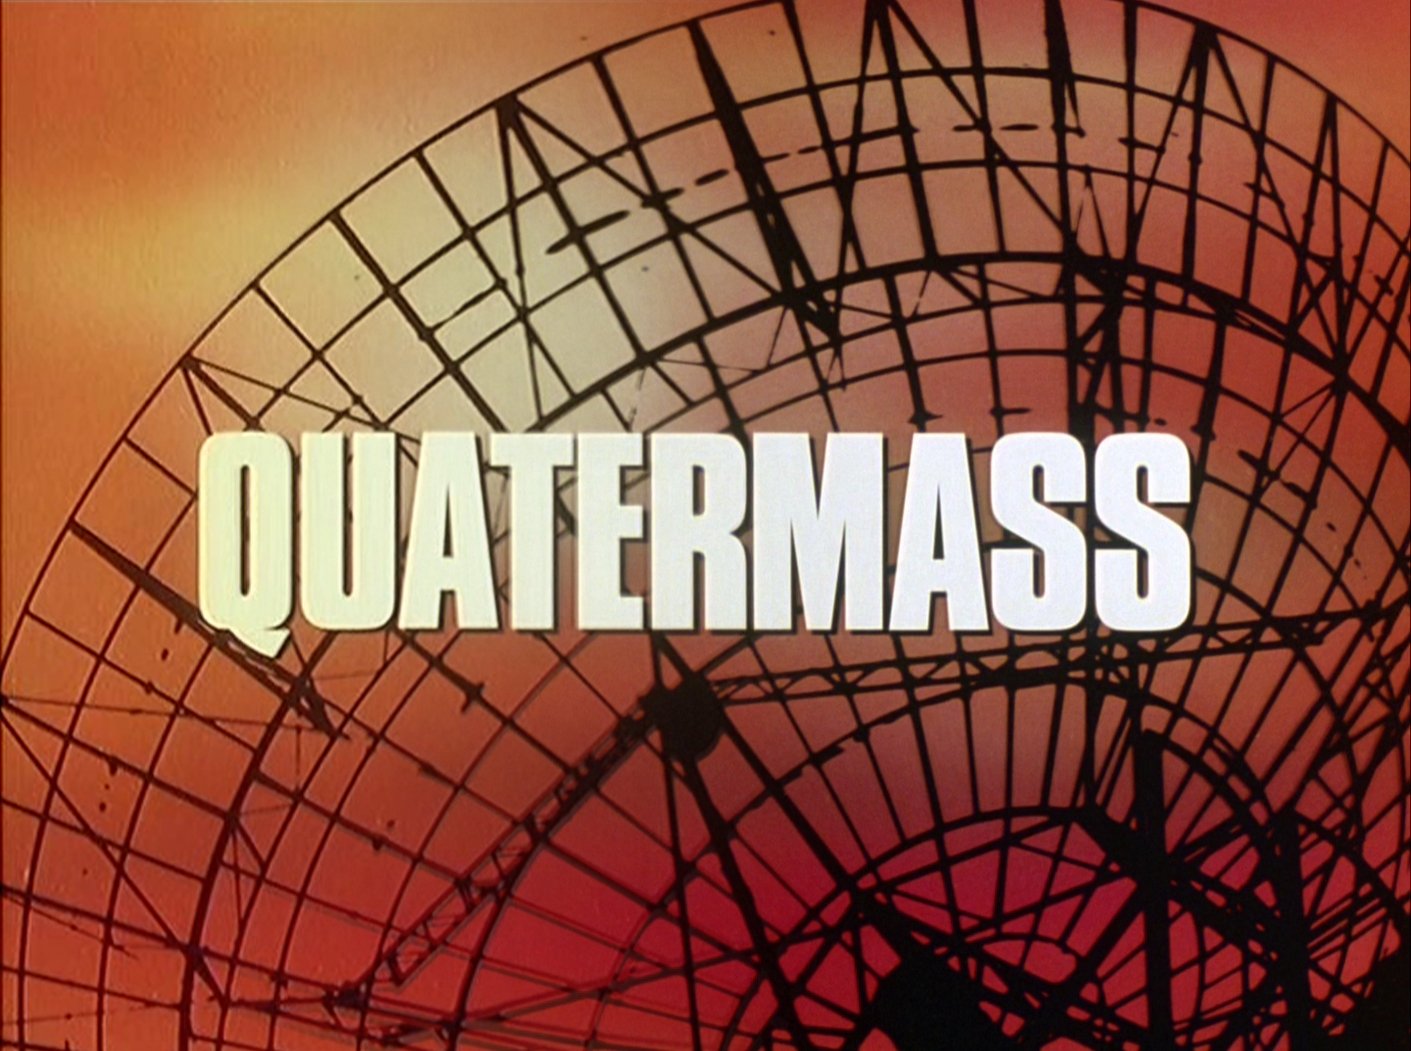 Your Chance to Watch Nigel Kneale’s Quatermass (1979), A Major Influence on Doctor Who